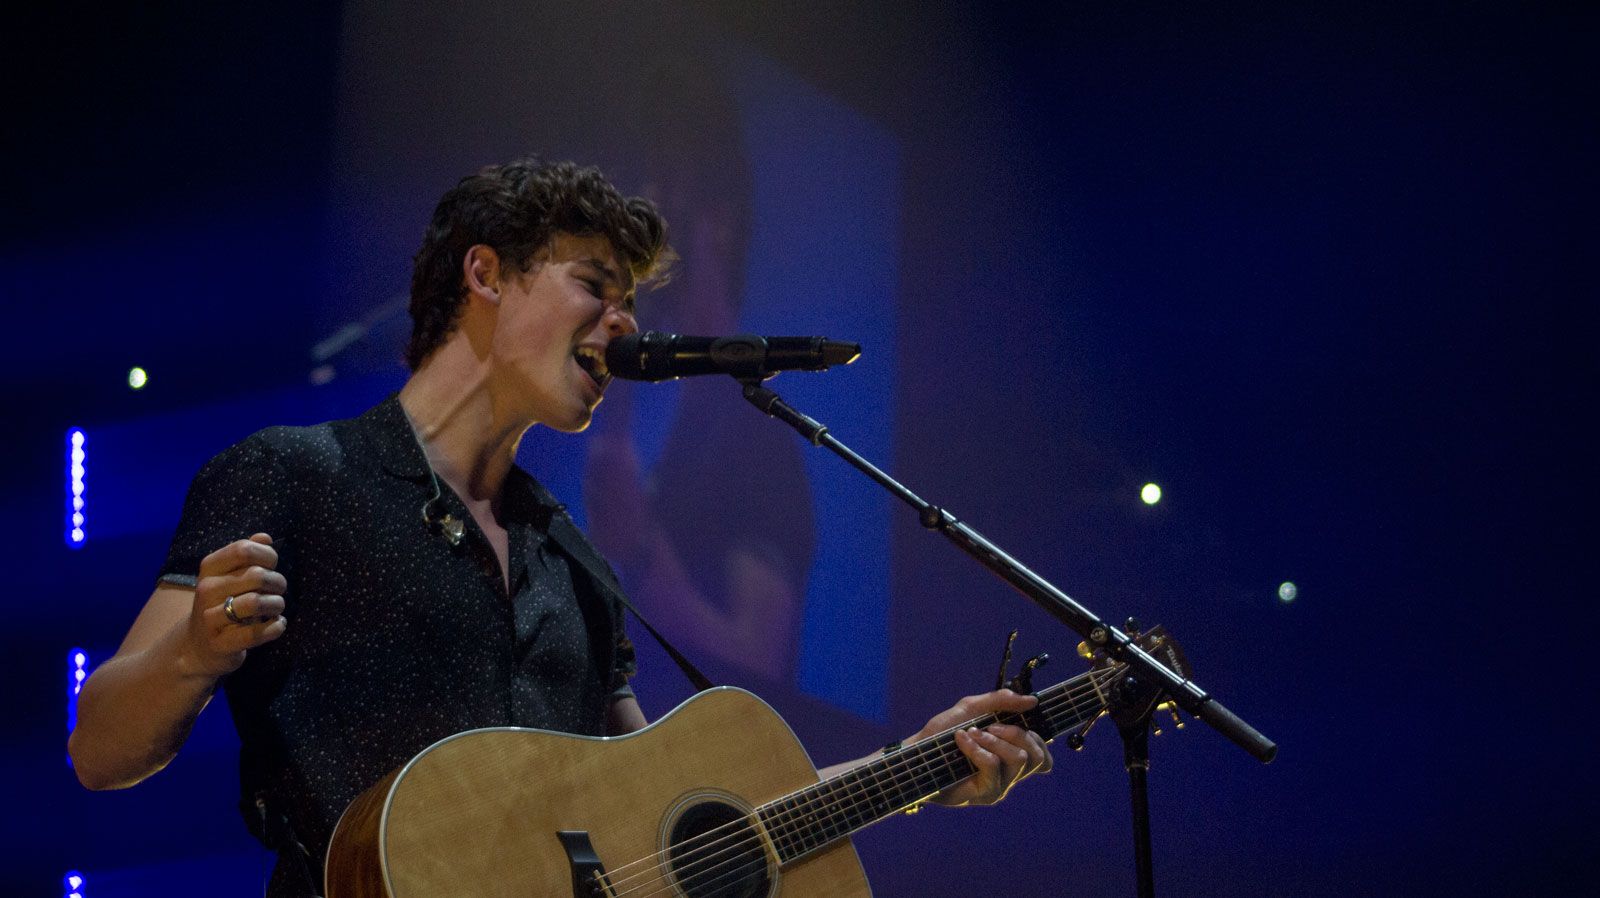 Shawn Mendes AT&T Center 7 21 17